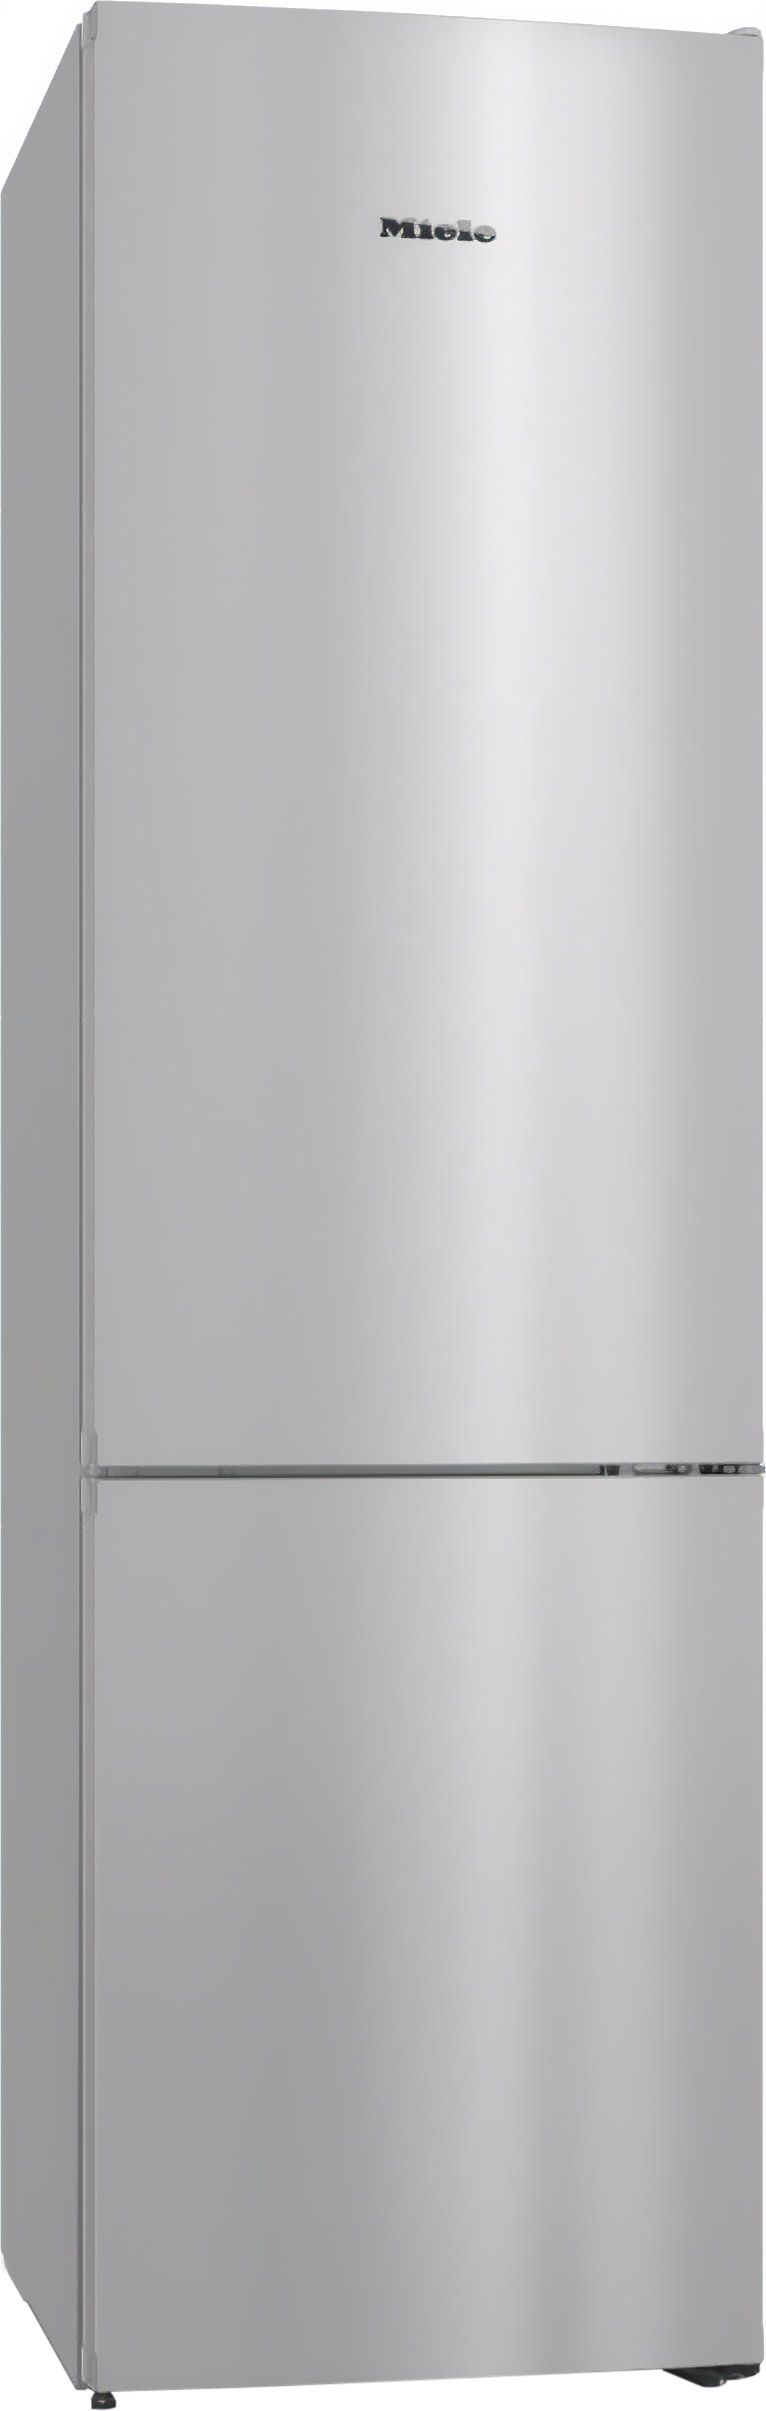 Miele KFN4391ED 70/30 Frost Free Fridge Freezer - Clean Steel - E Rated, Stainless Steel